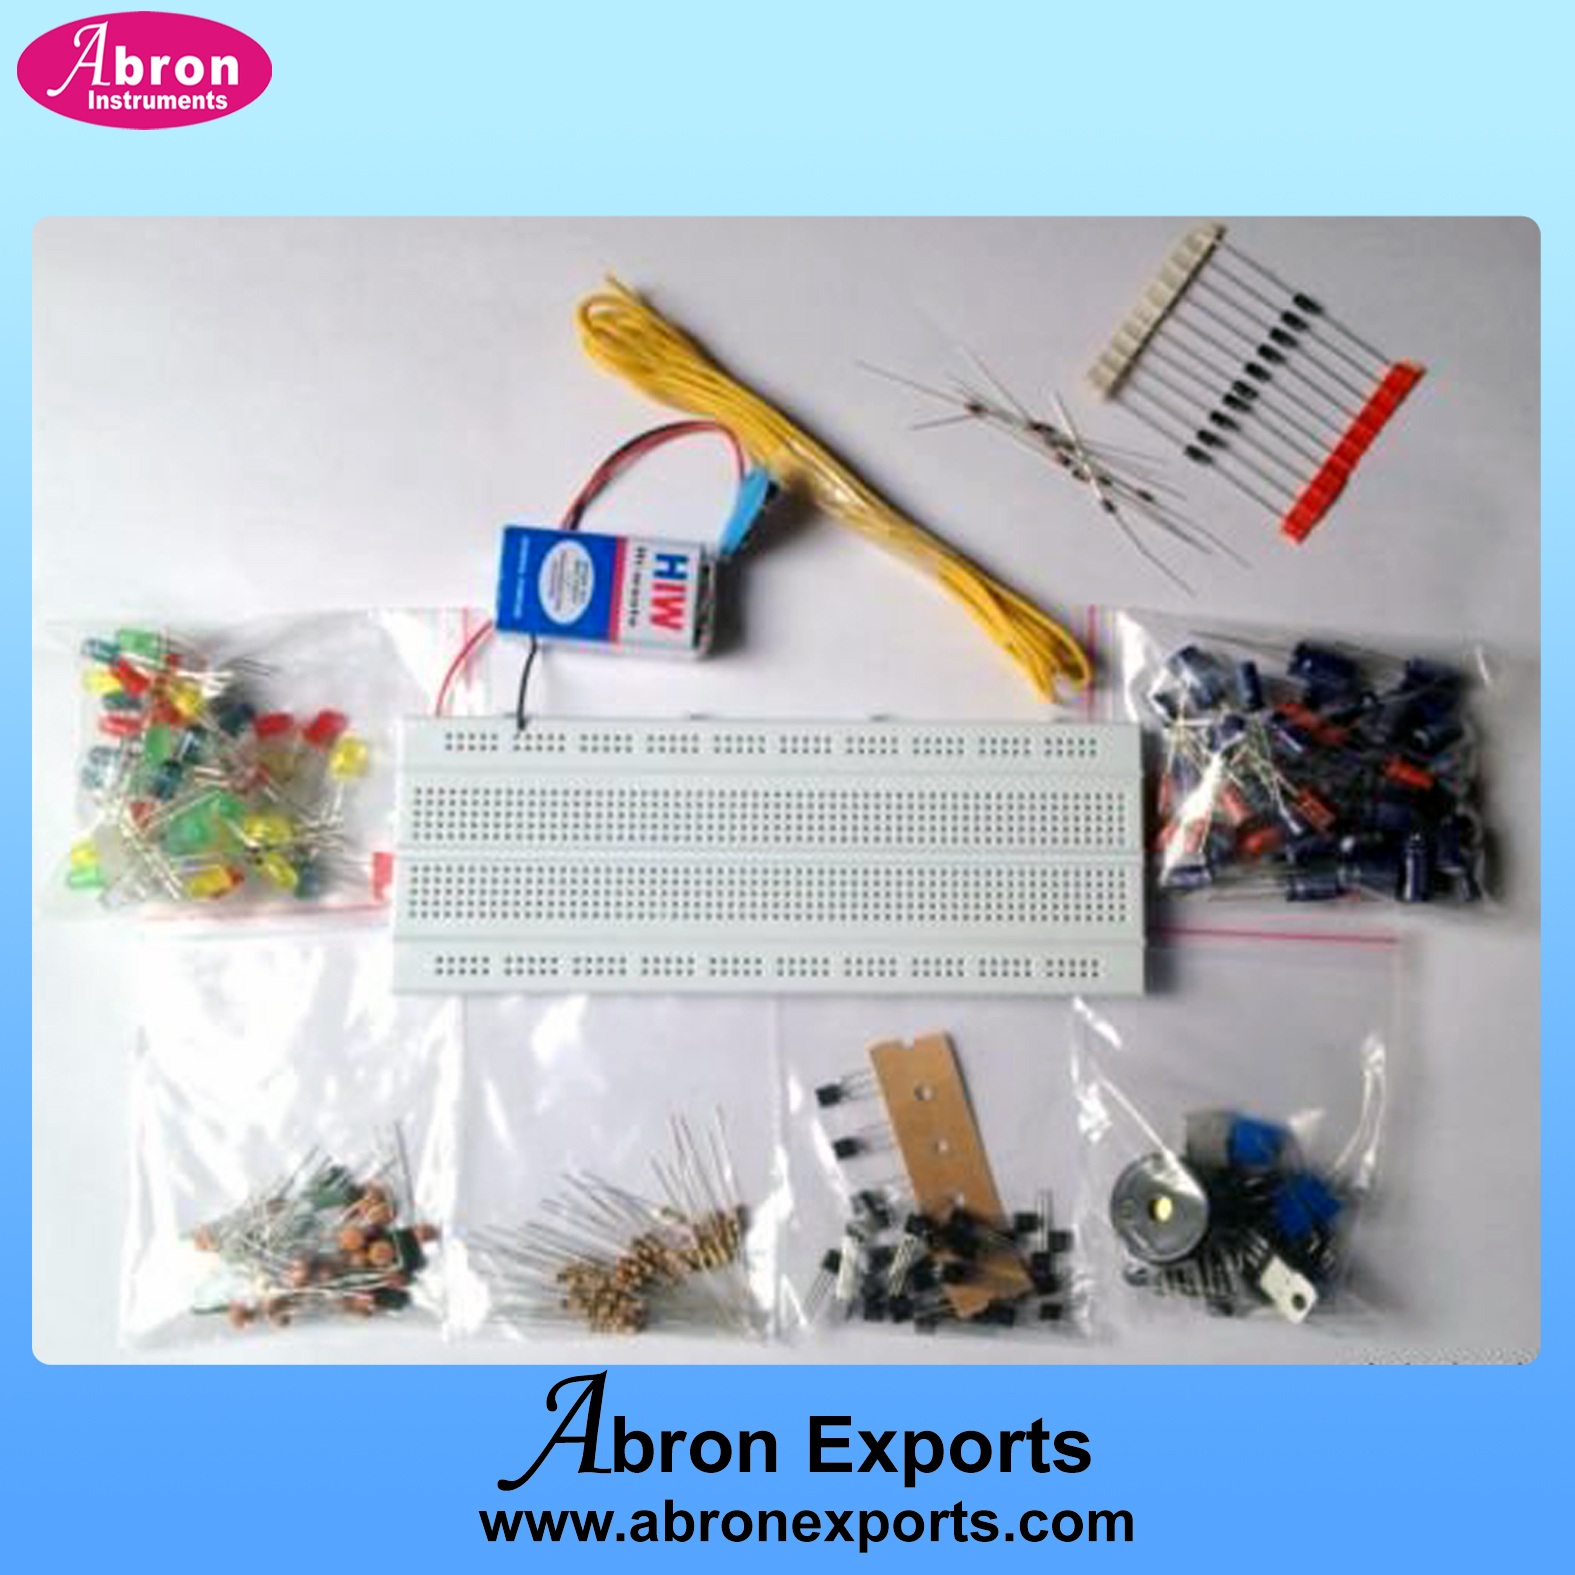 Electronic component abron kit circuit spare loose ic diode led parts loose AE-1224k7